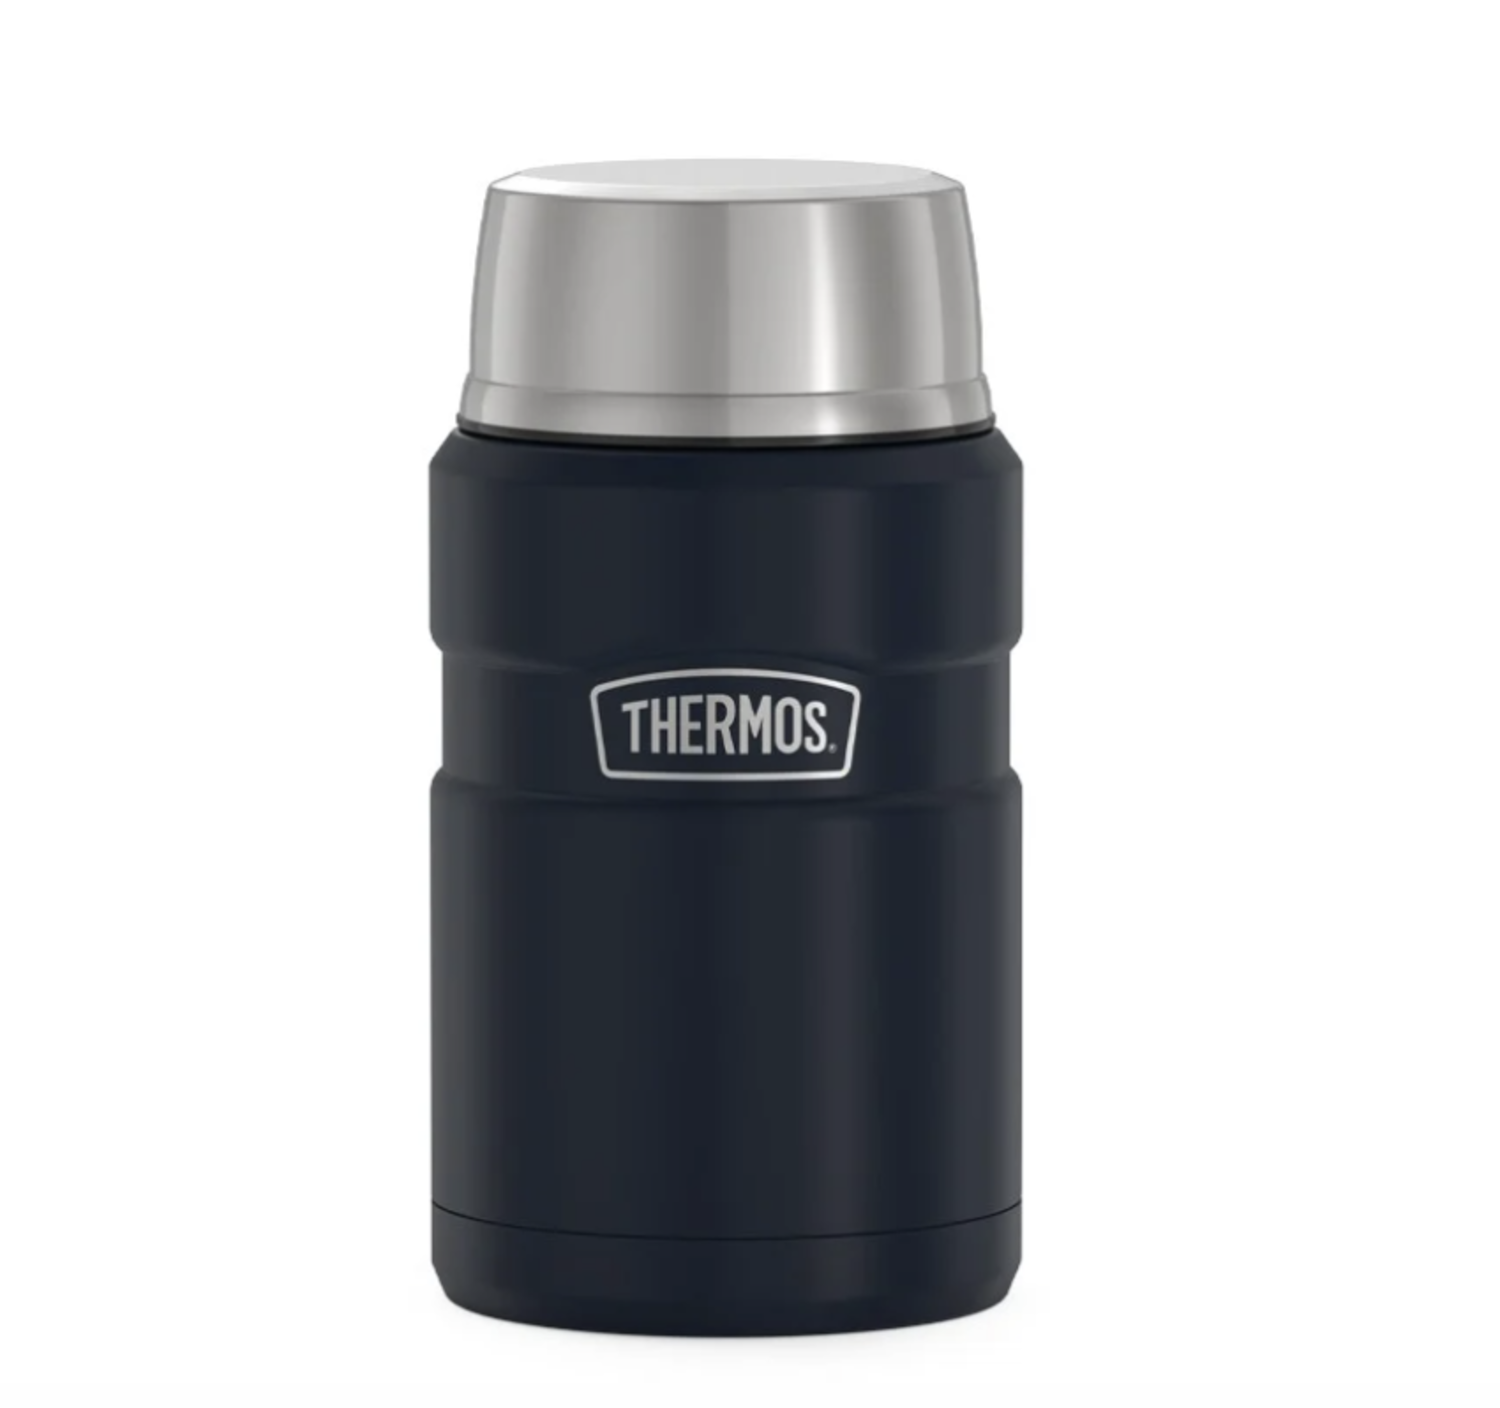 Buy Thermos Stainless King Thermal Food Jar with Spoon 16 Oz., Matte Blue